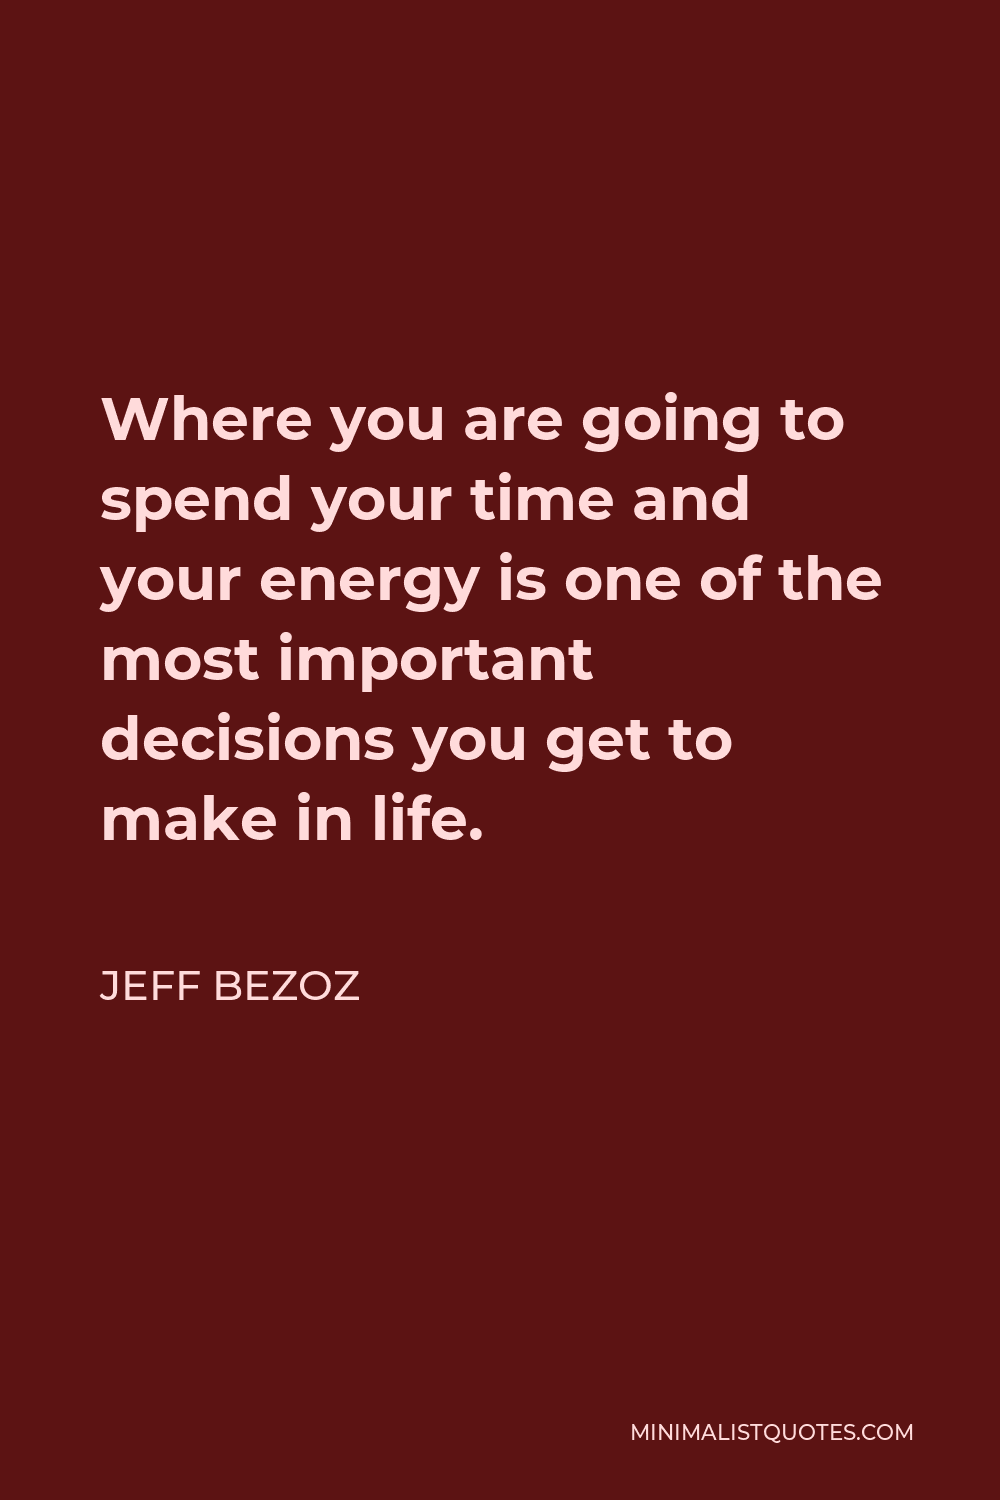 Jeff Bezoz Quote - Where you are going to spend your time and your energy is one of the most important decisions you get to make in life.